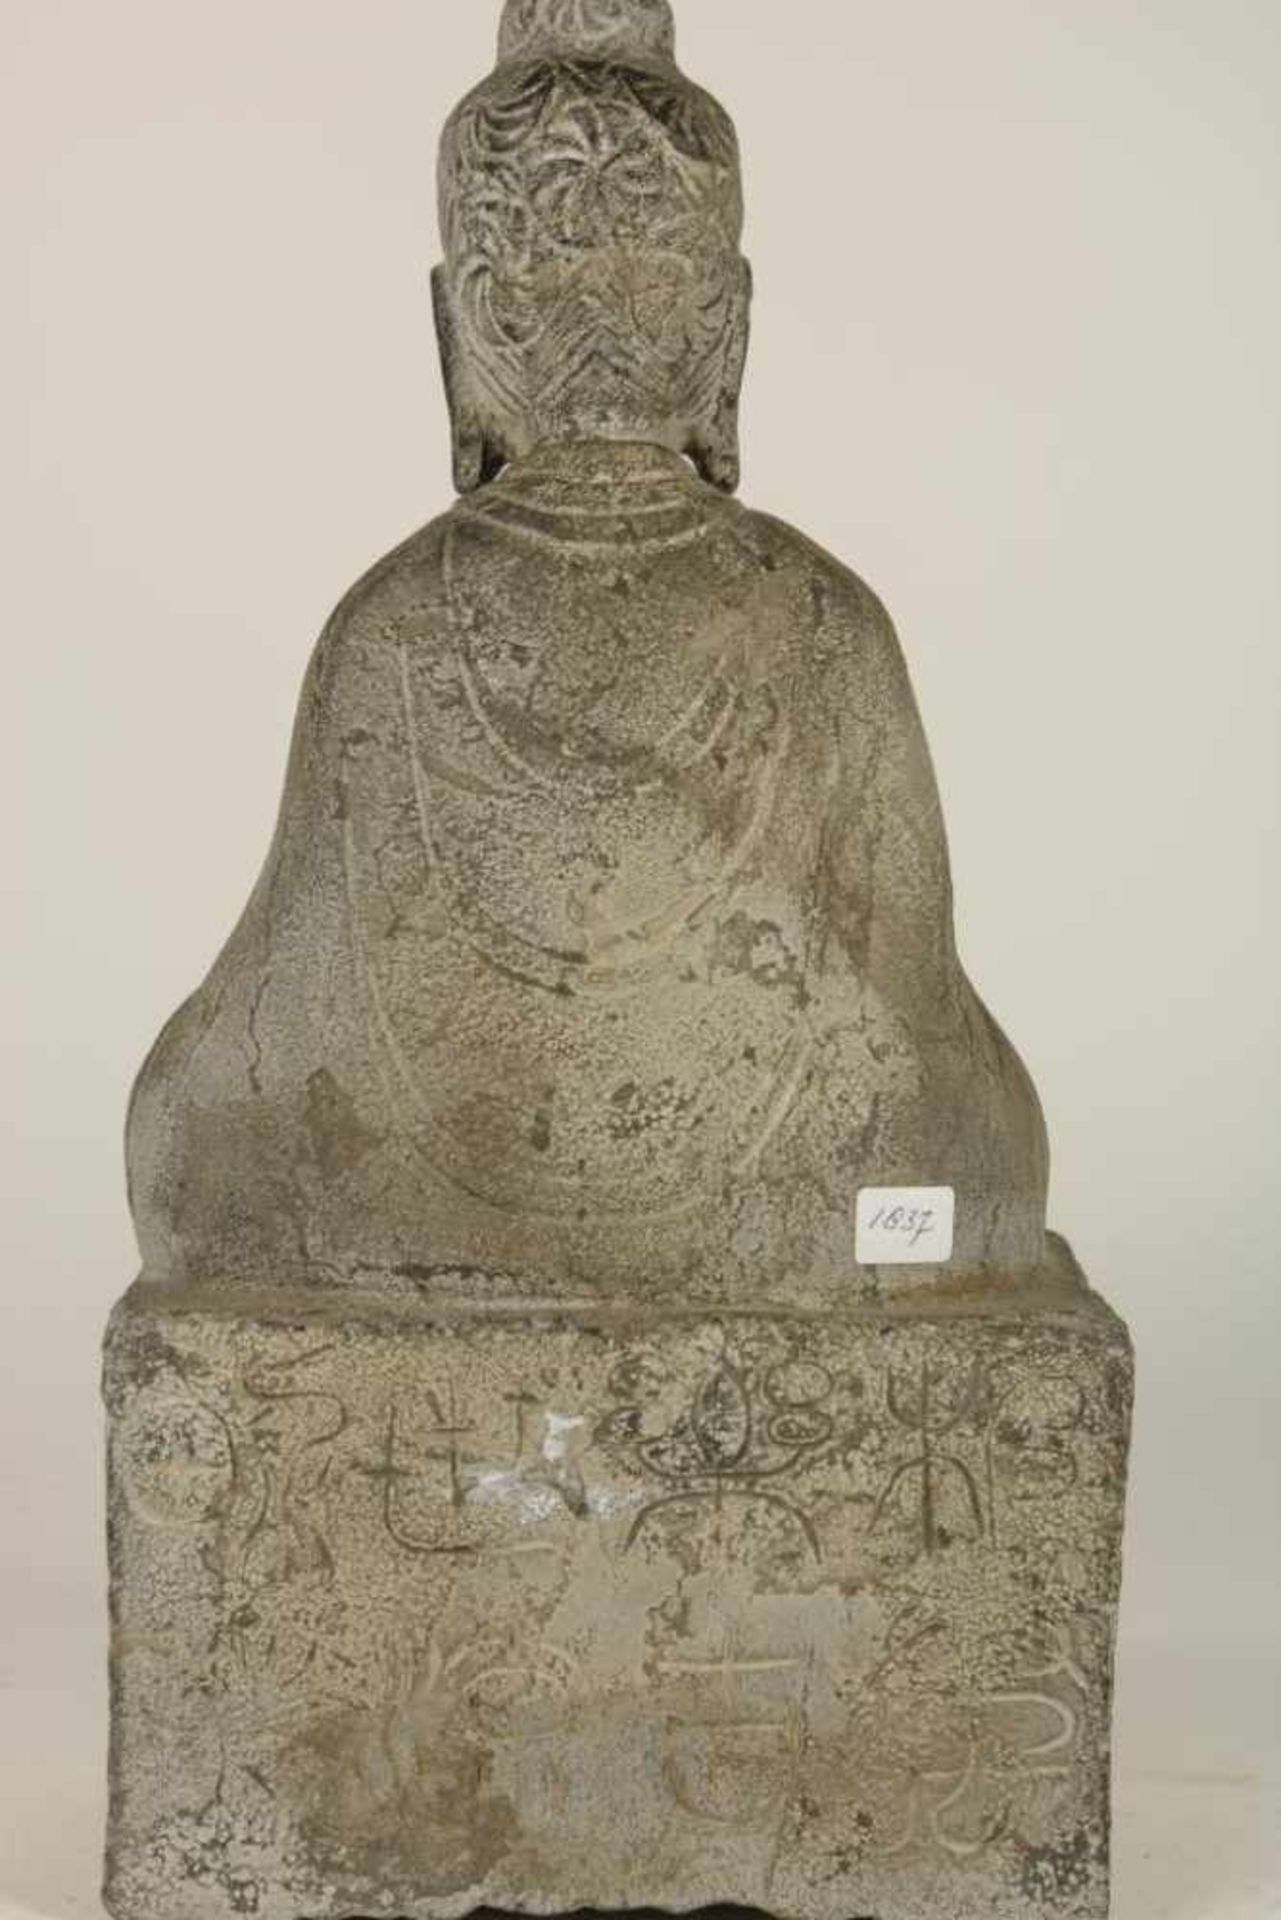 Stone sculpture of Boeddha, back side with Chinese text, China 20 th century, h. 42 cm. - Bild 4 aus 4